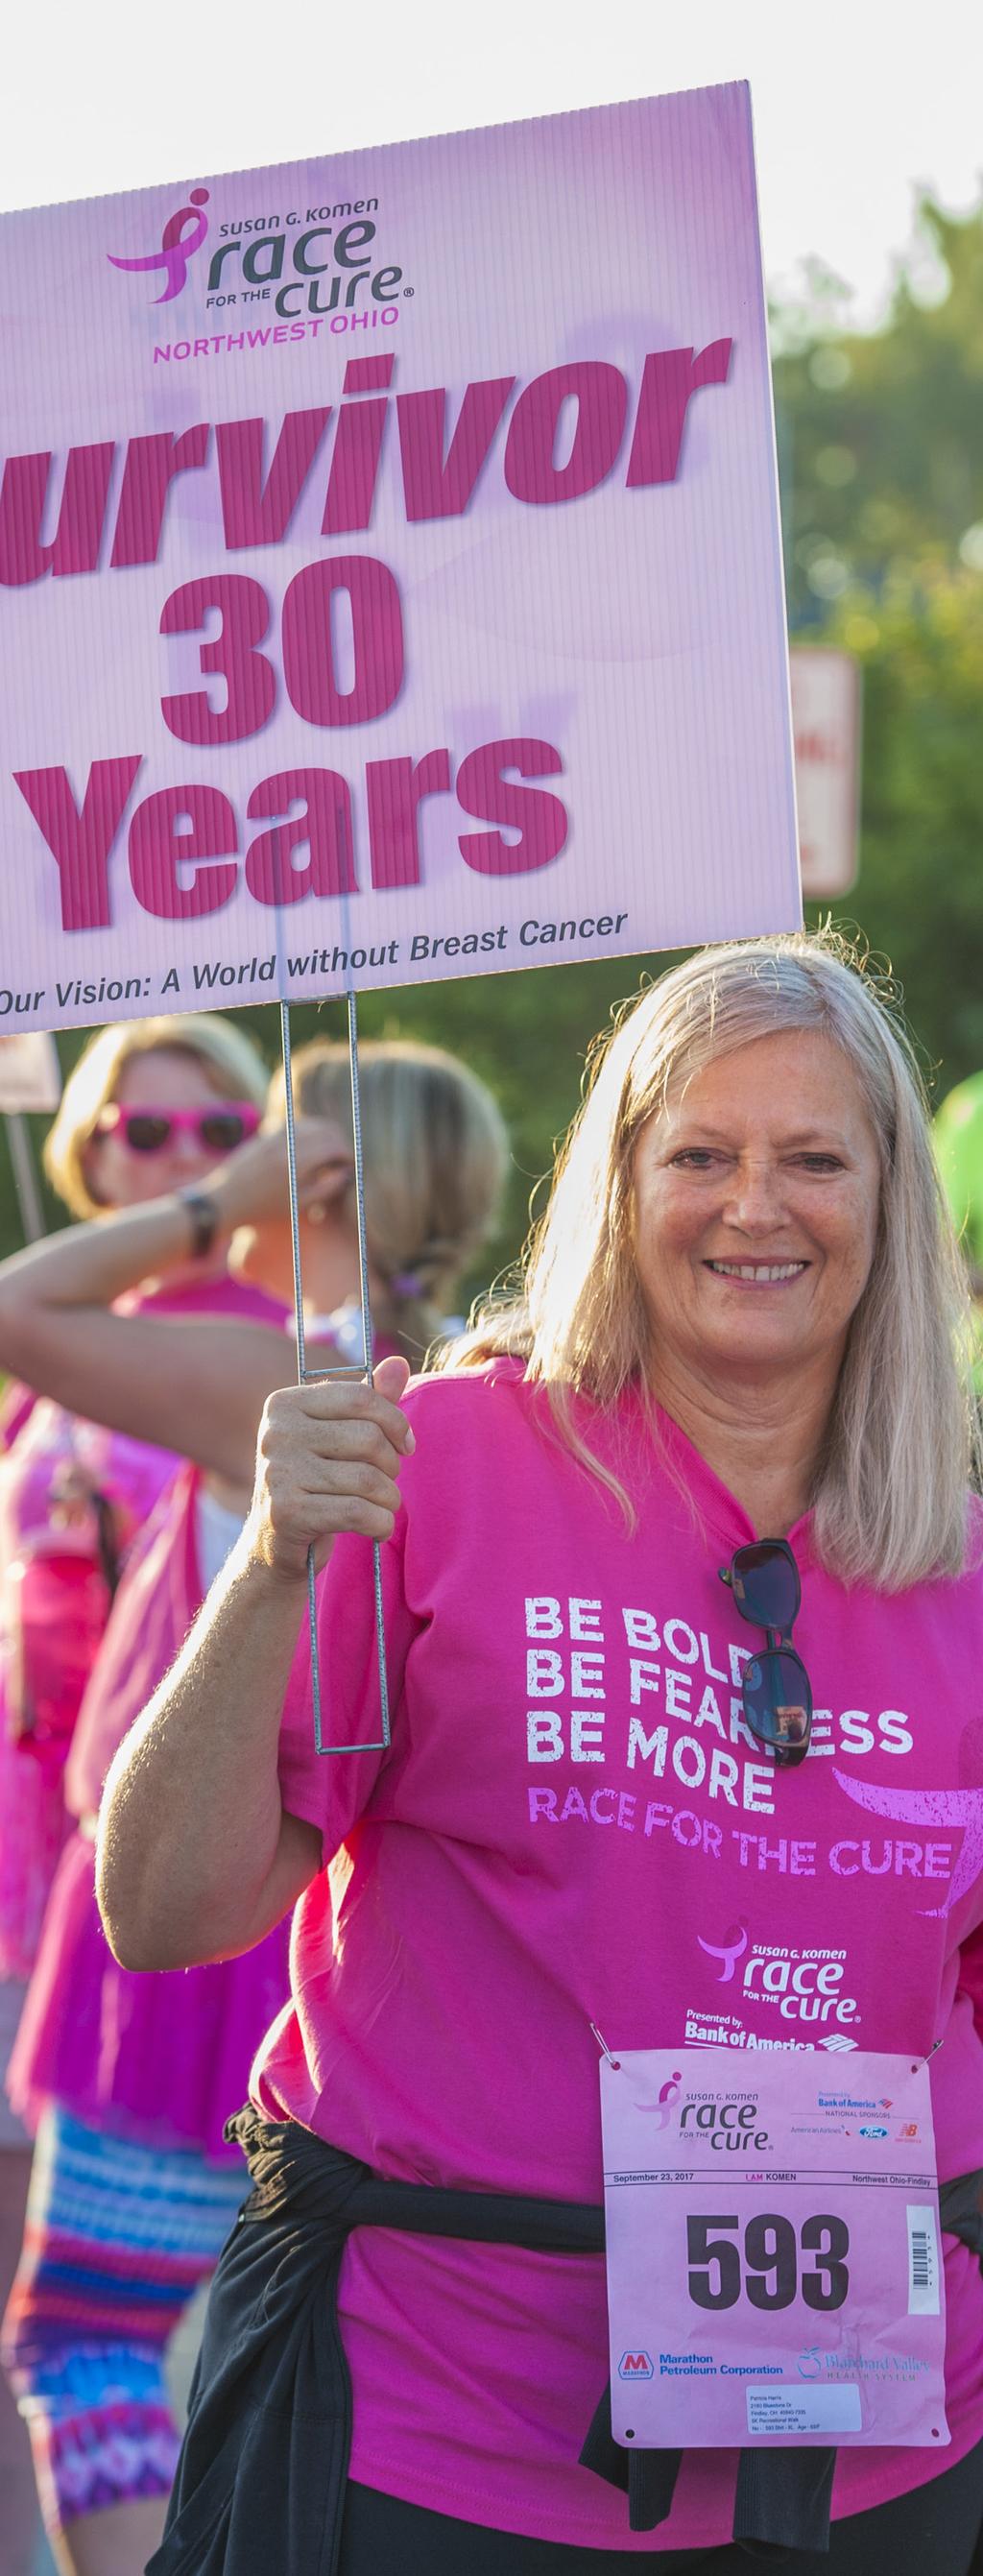 Join the Movement Thank you for your interest in the Susan G. Komen Northwest Ohio Race for the Cure in Findlay on Saturday, September 29, 2018!